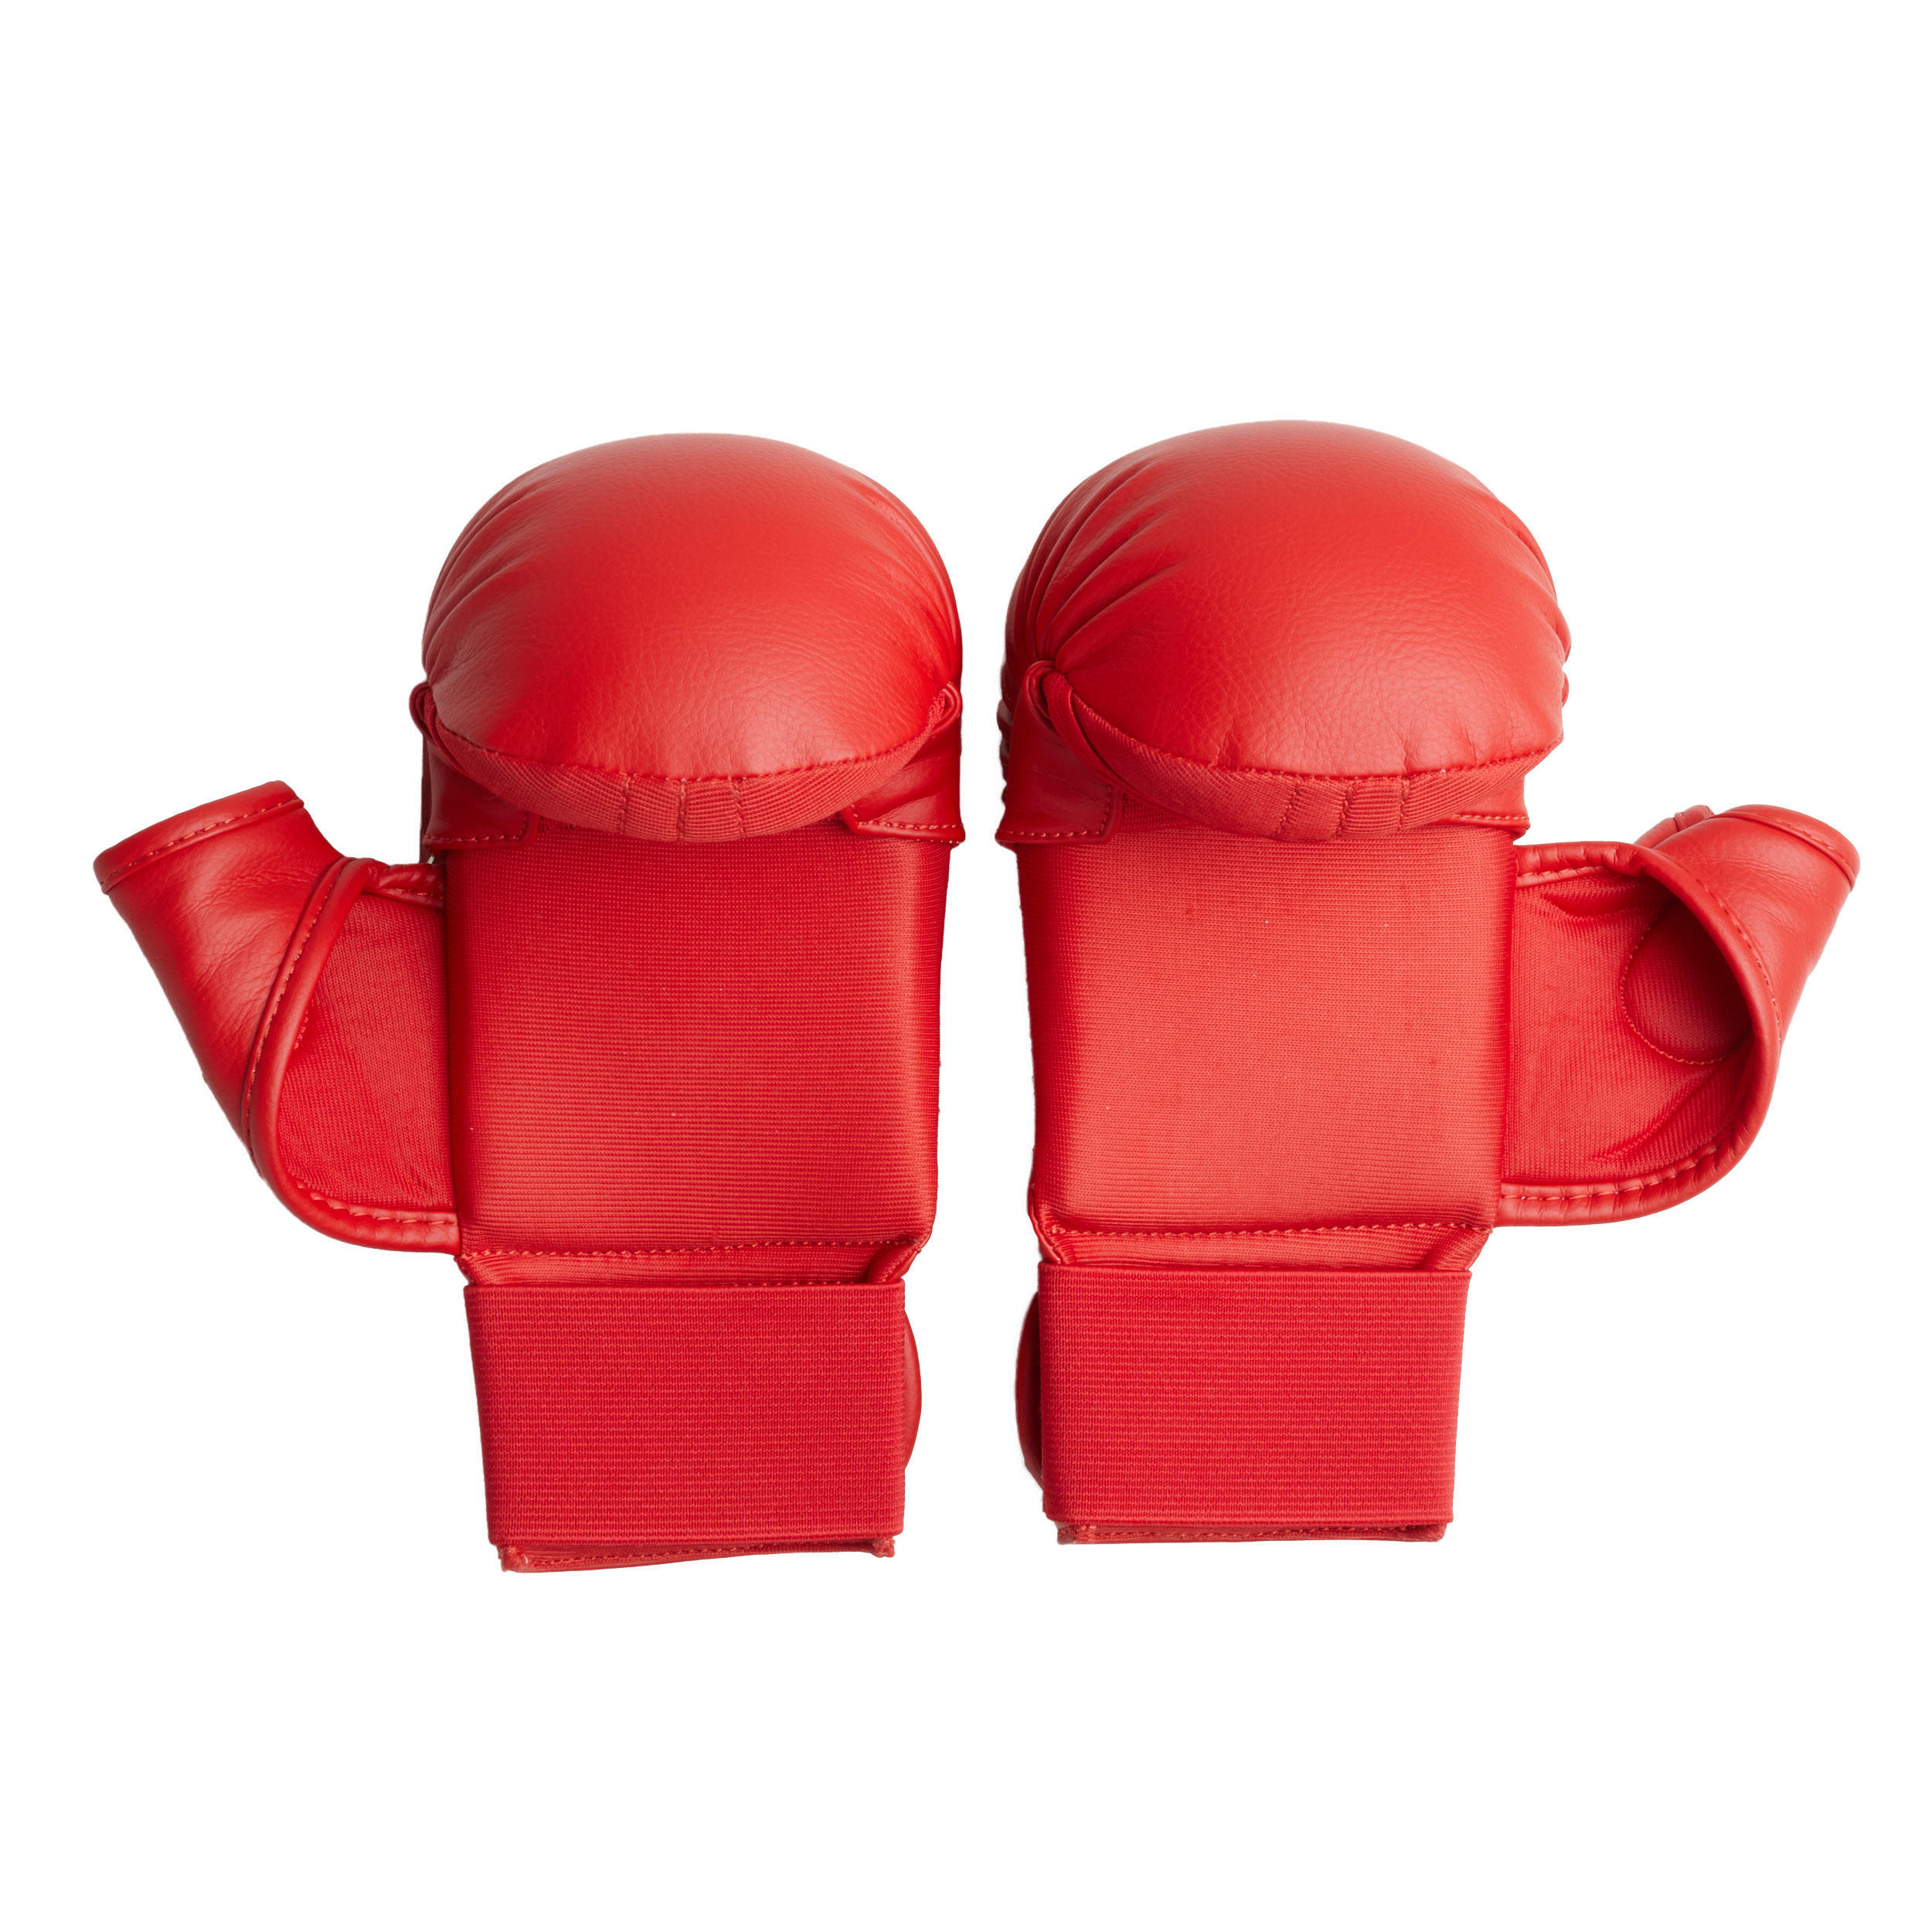 Karate Mitts 900 - Red 2/9